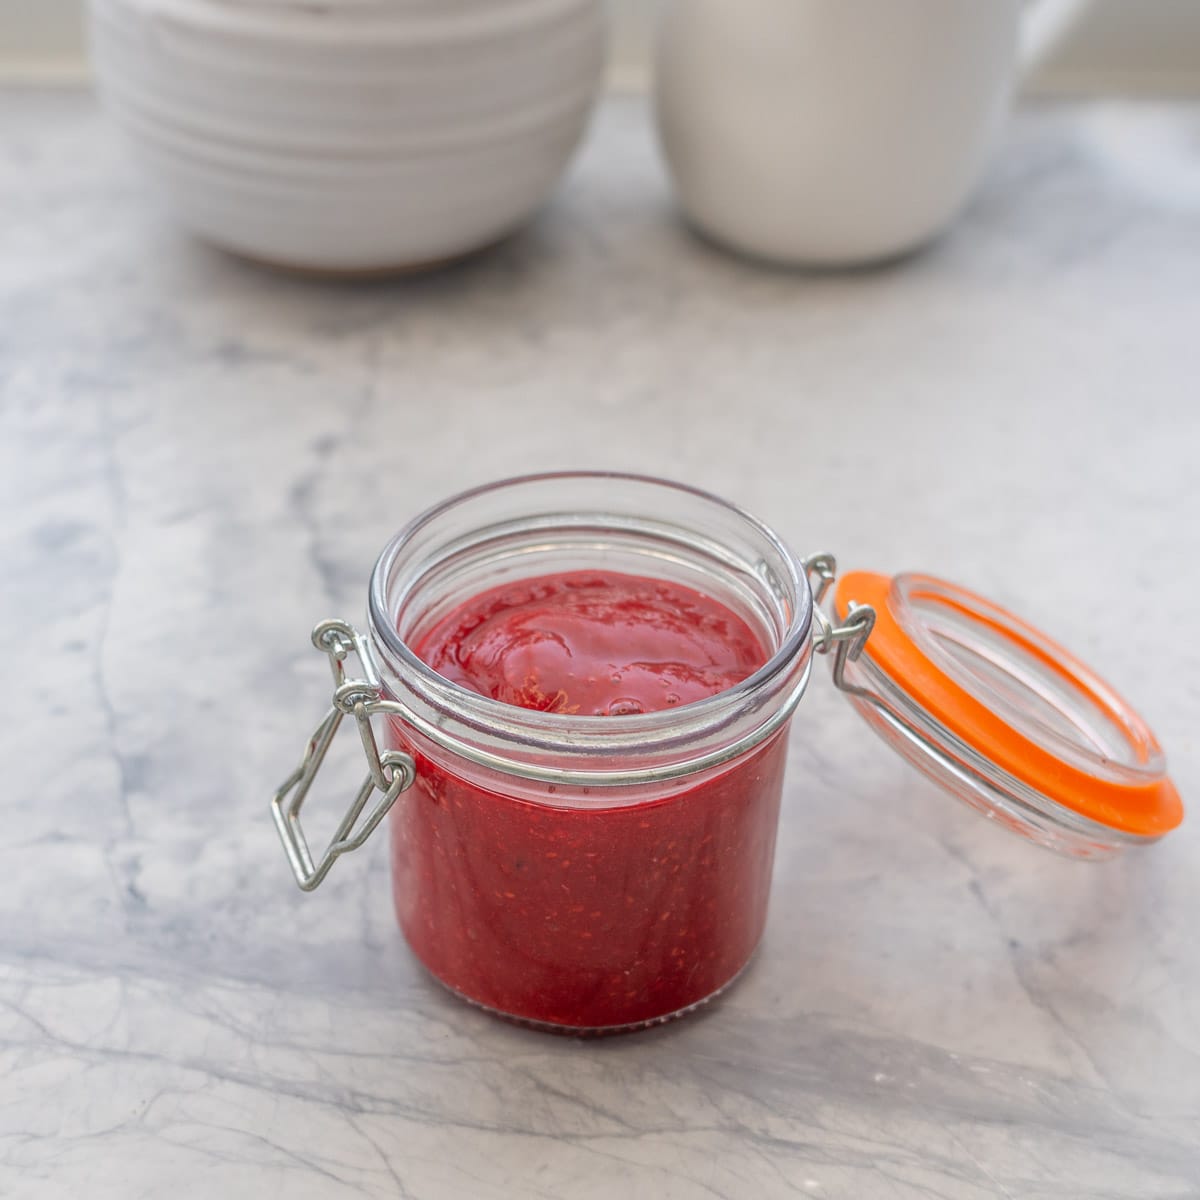 A small jar filled with raspberry puree resting on the bench  